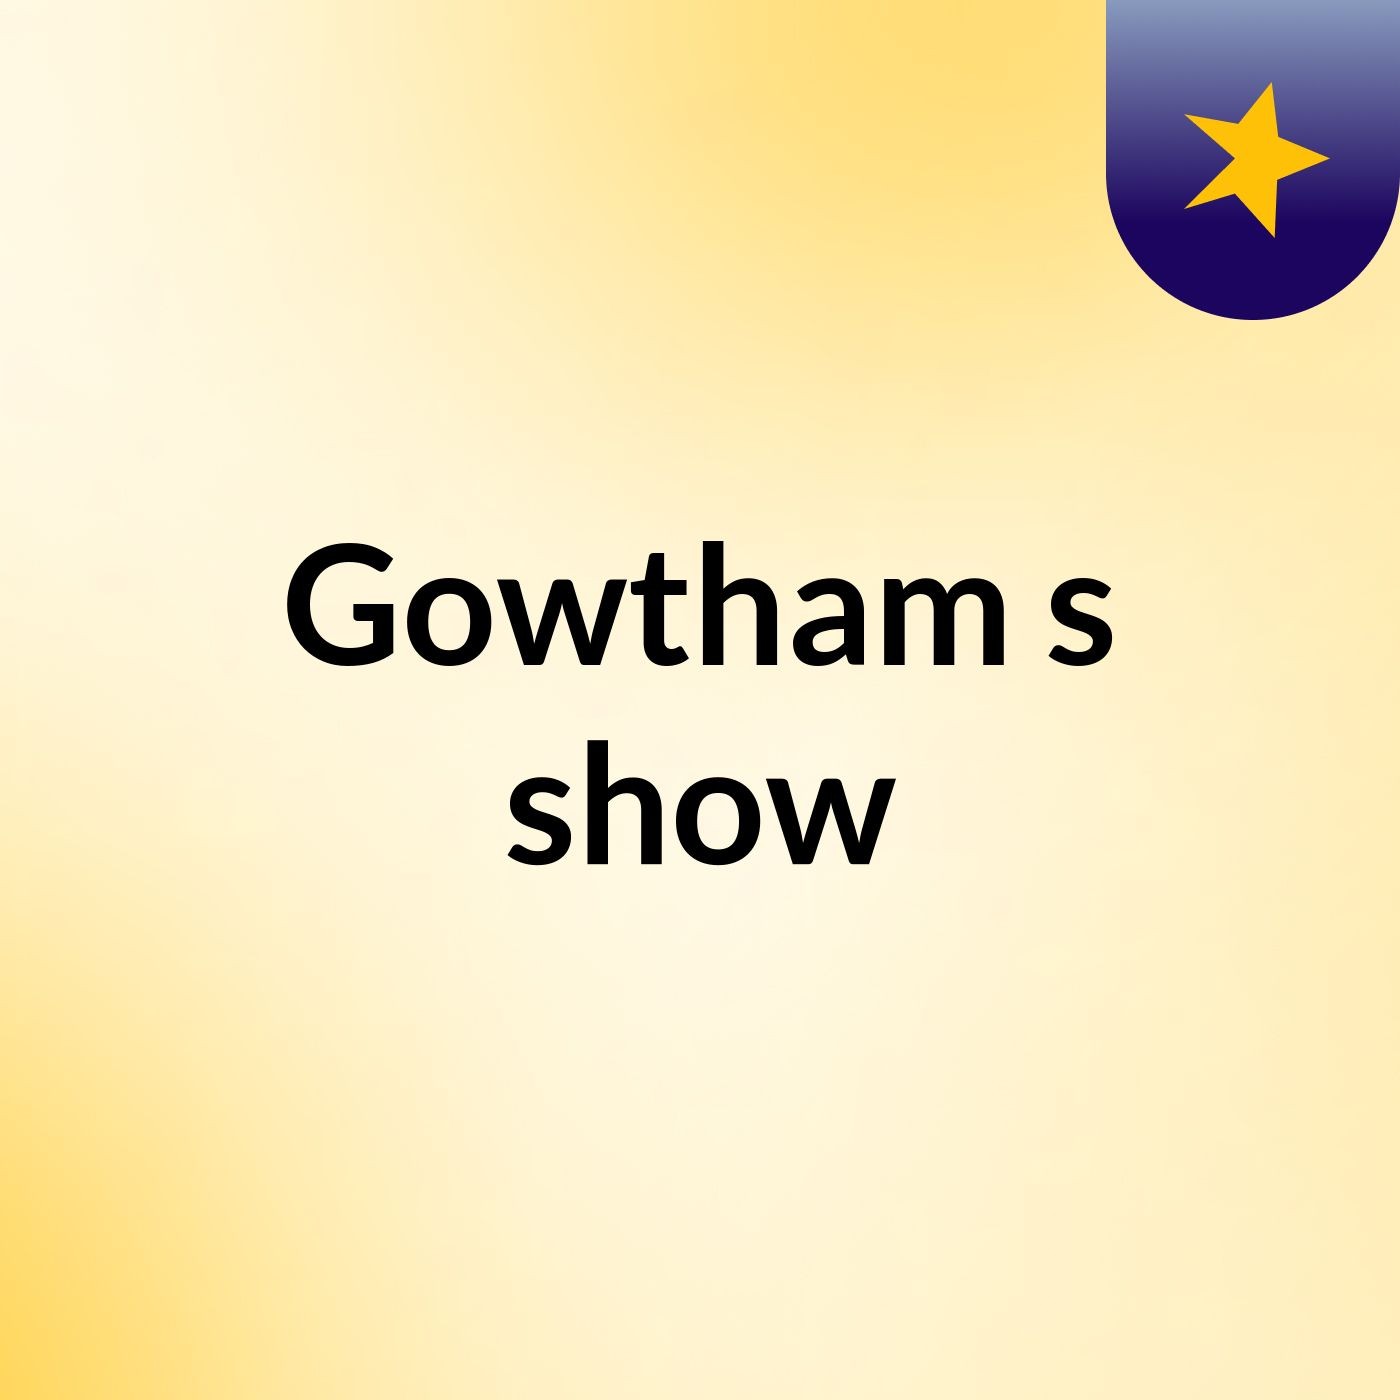 Gowtham's show